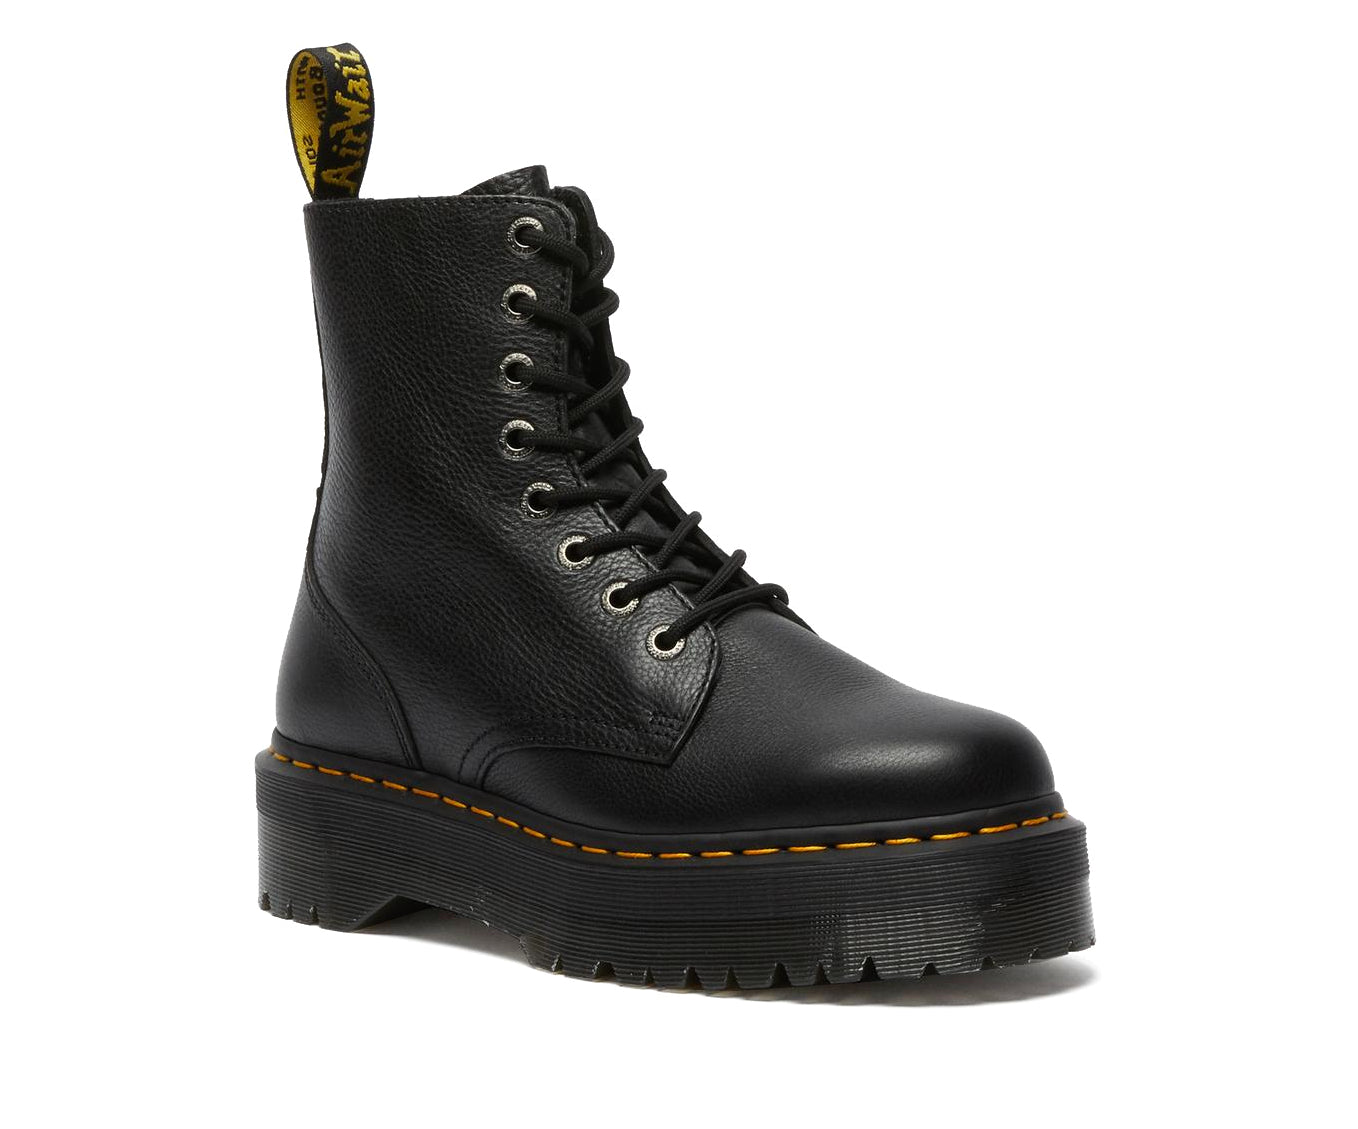 A mid-ankle height, laced, black leather platform boot.